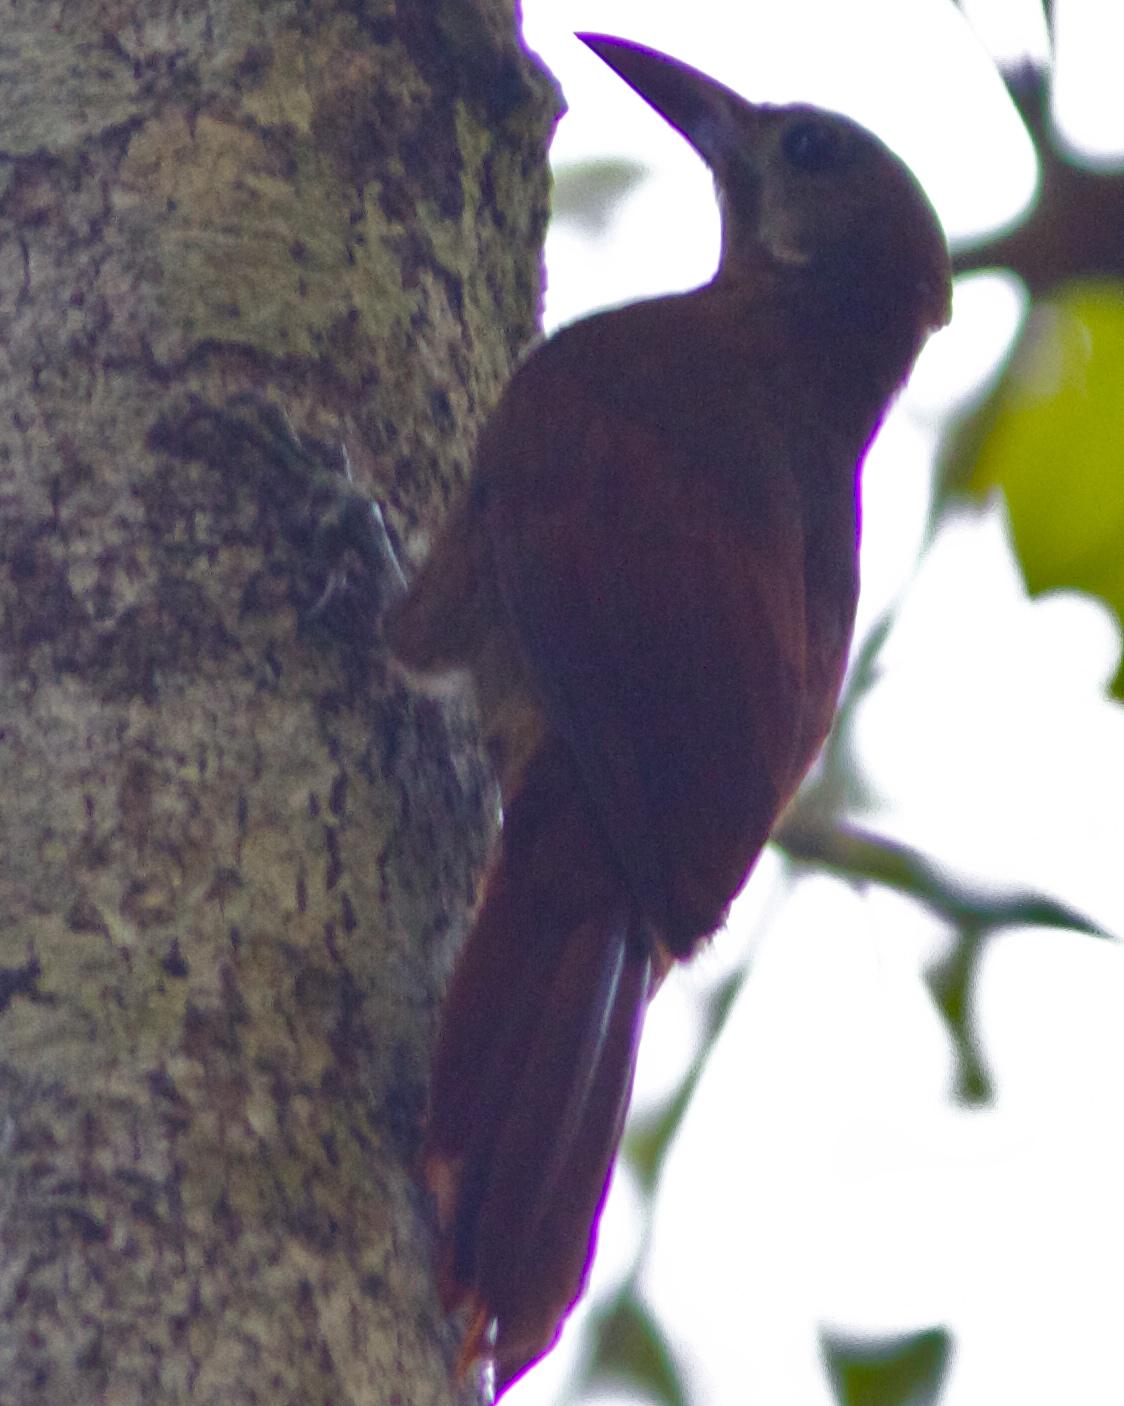 Red-billed Woodcreeper Photo by Marcelo Padua